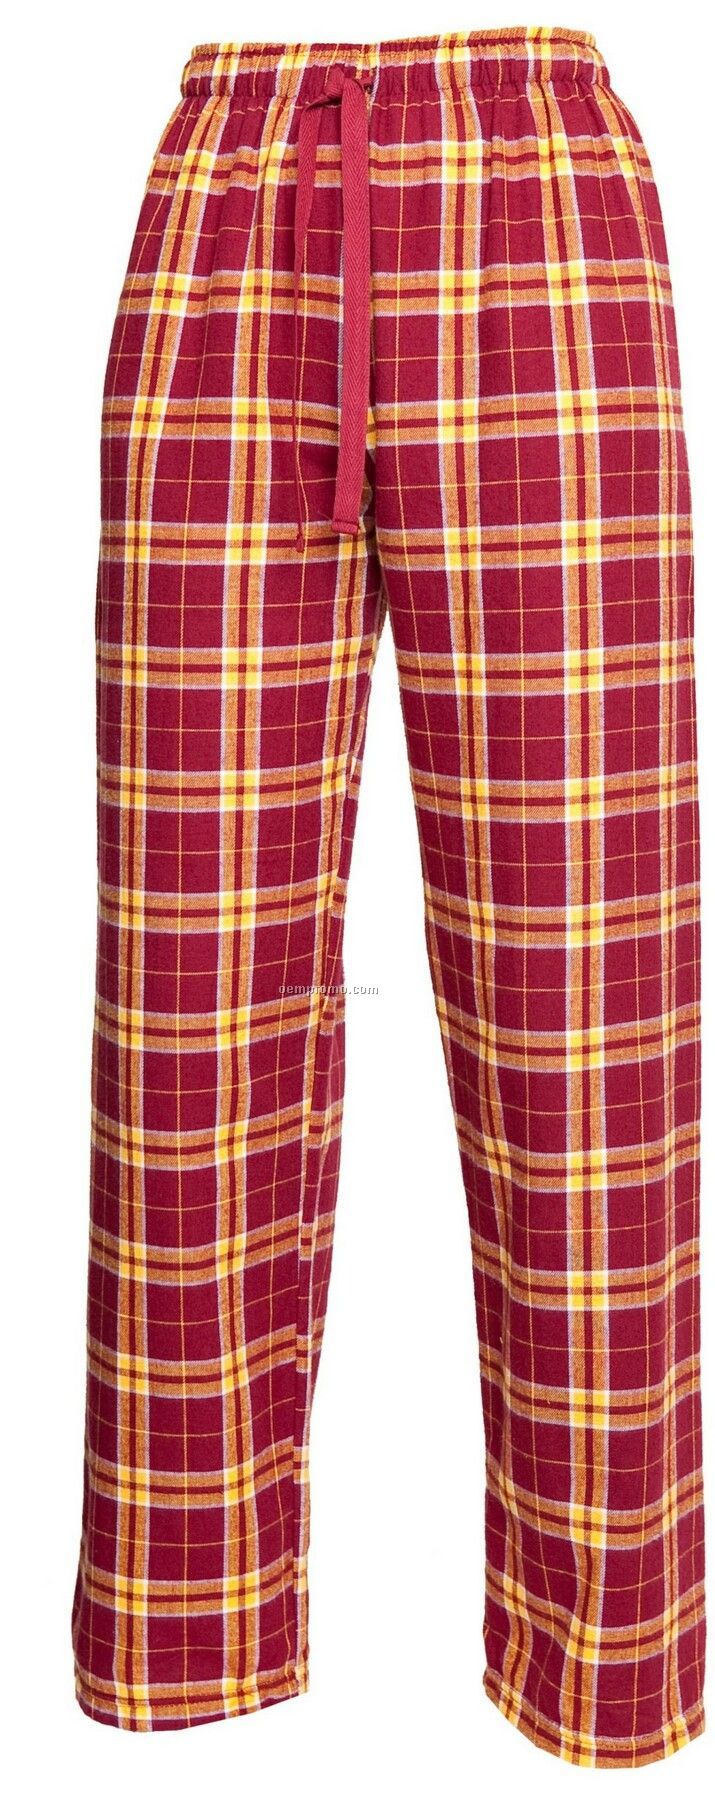 Youth Team Pride Flannel Pant In Maroon Red & Gold Plaid